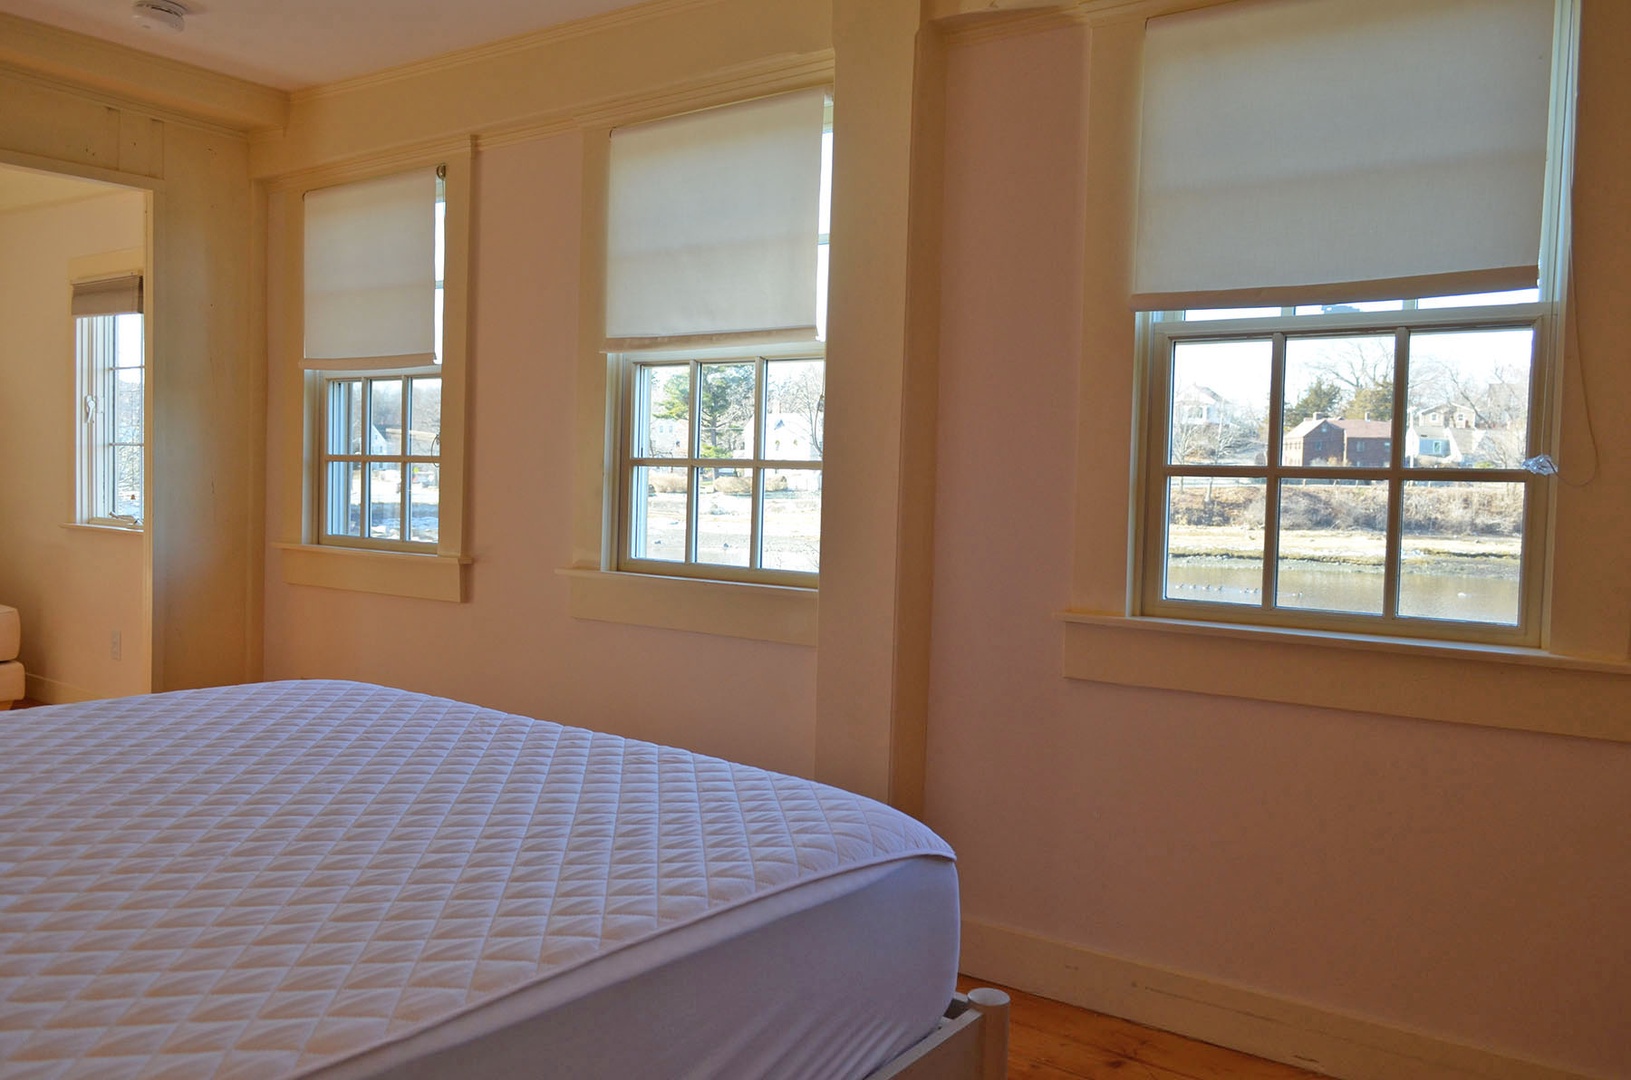 Wake up to the beautiful water views and natural light flowing in.